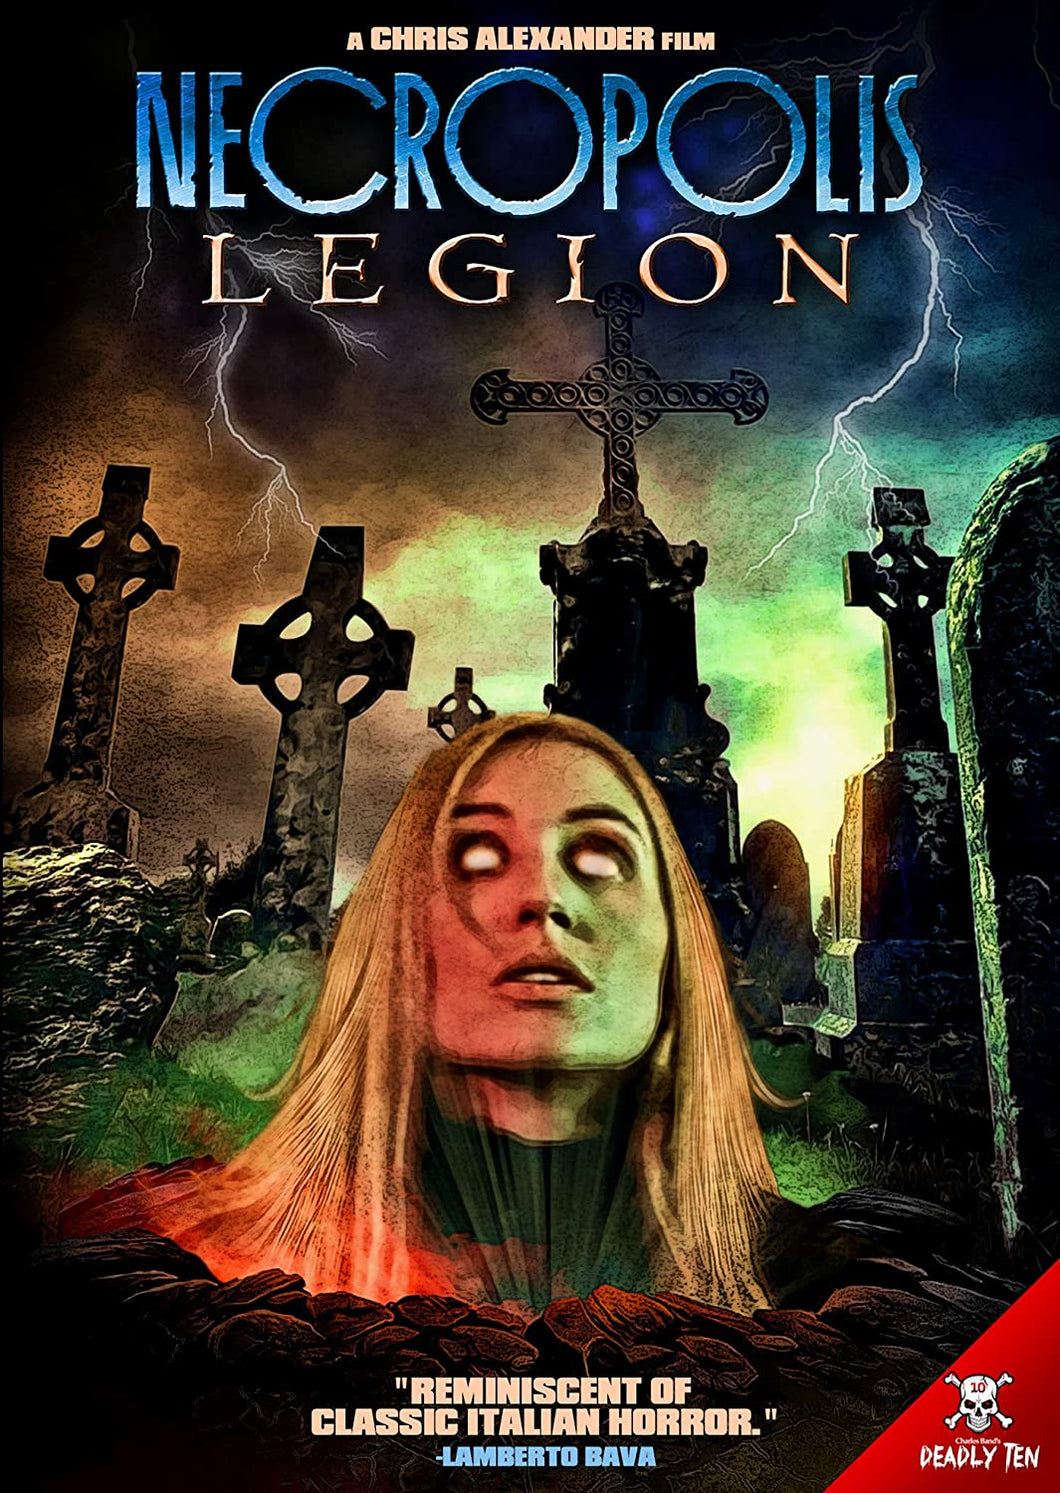 Necropolis: Legion - Signed DVD - LIMITED QUANTITIES AVAILABLE